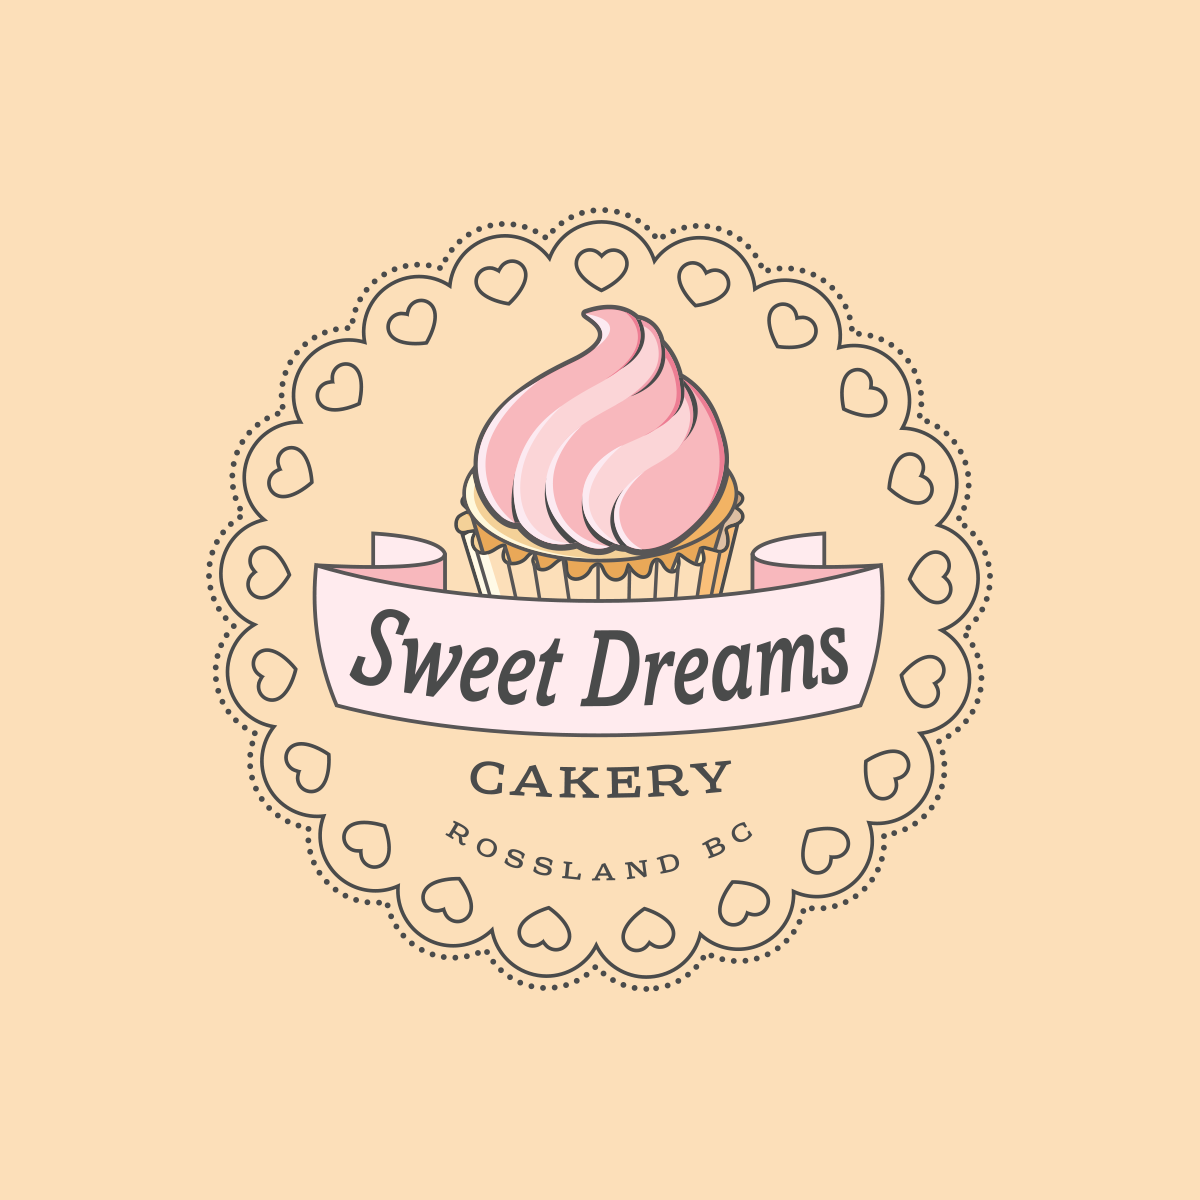 Sweet Dreams Cakery in Rossland BC logo design, brand identity, graphic design and printing